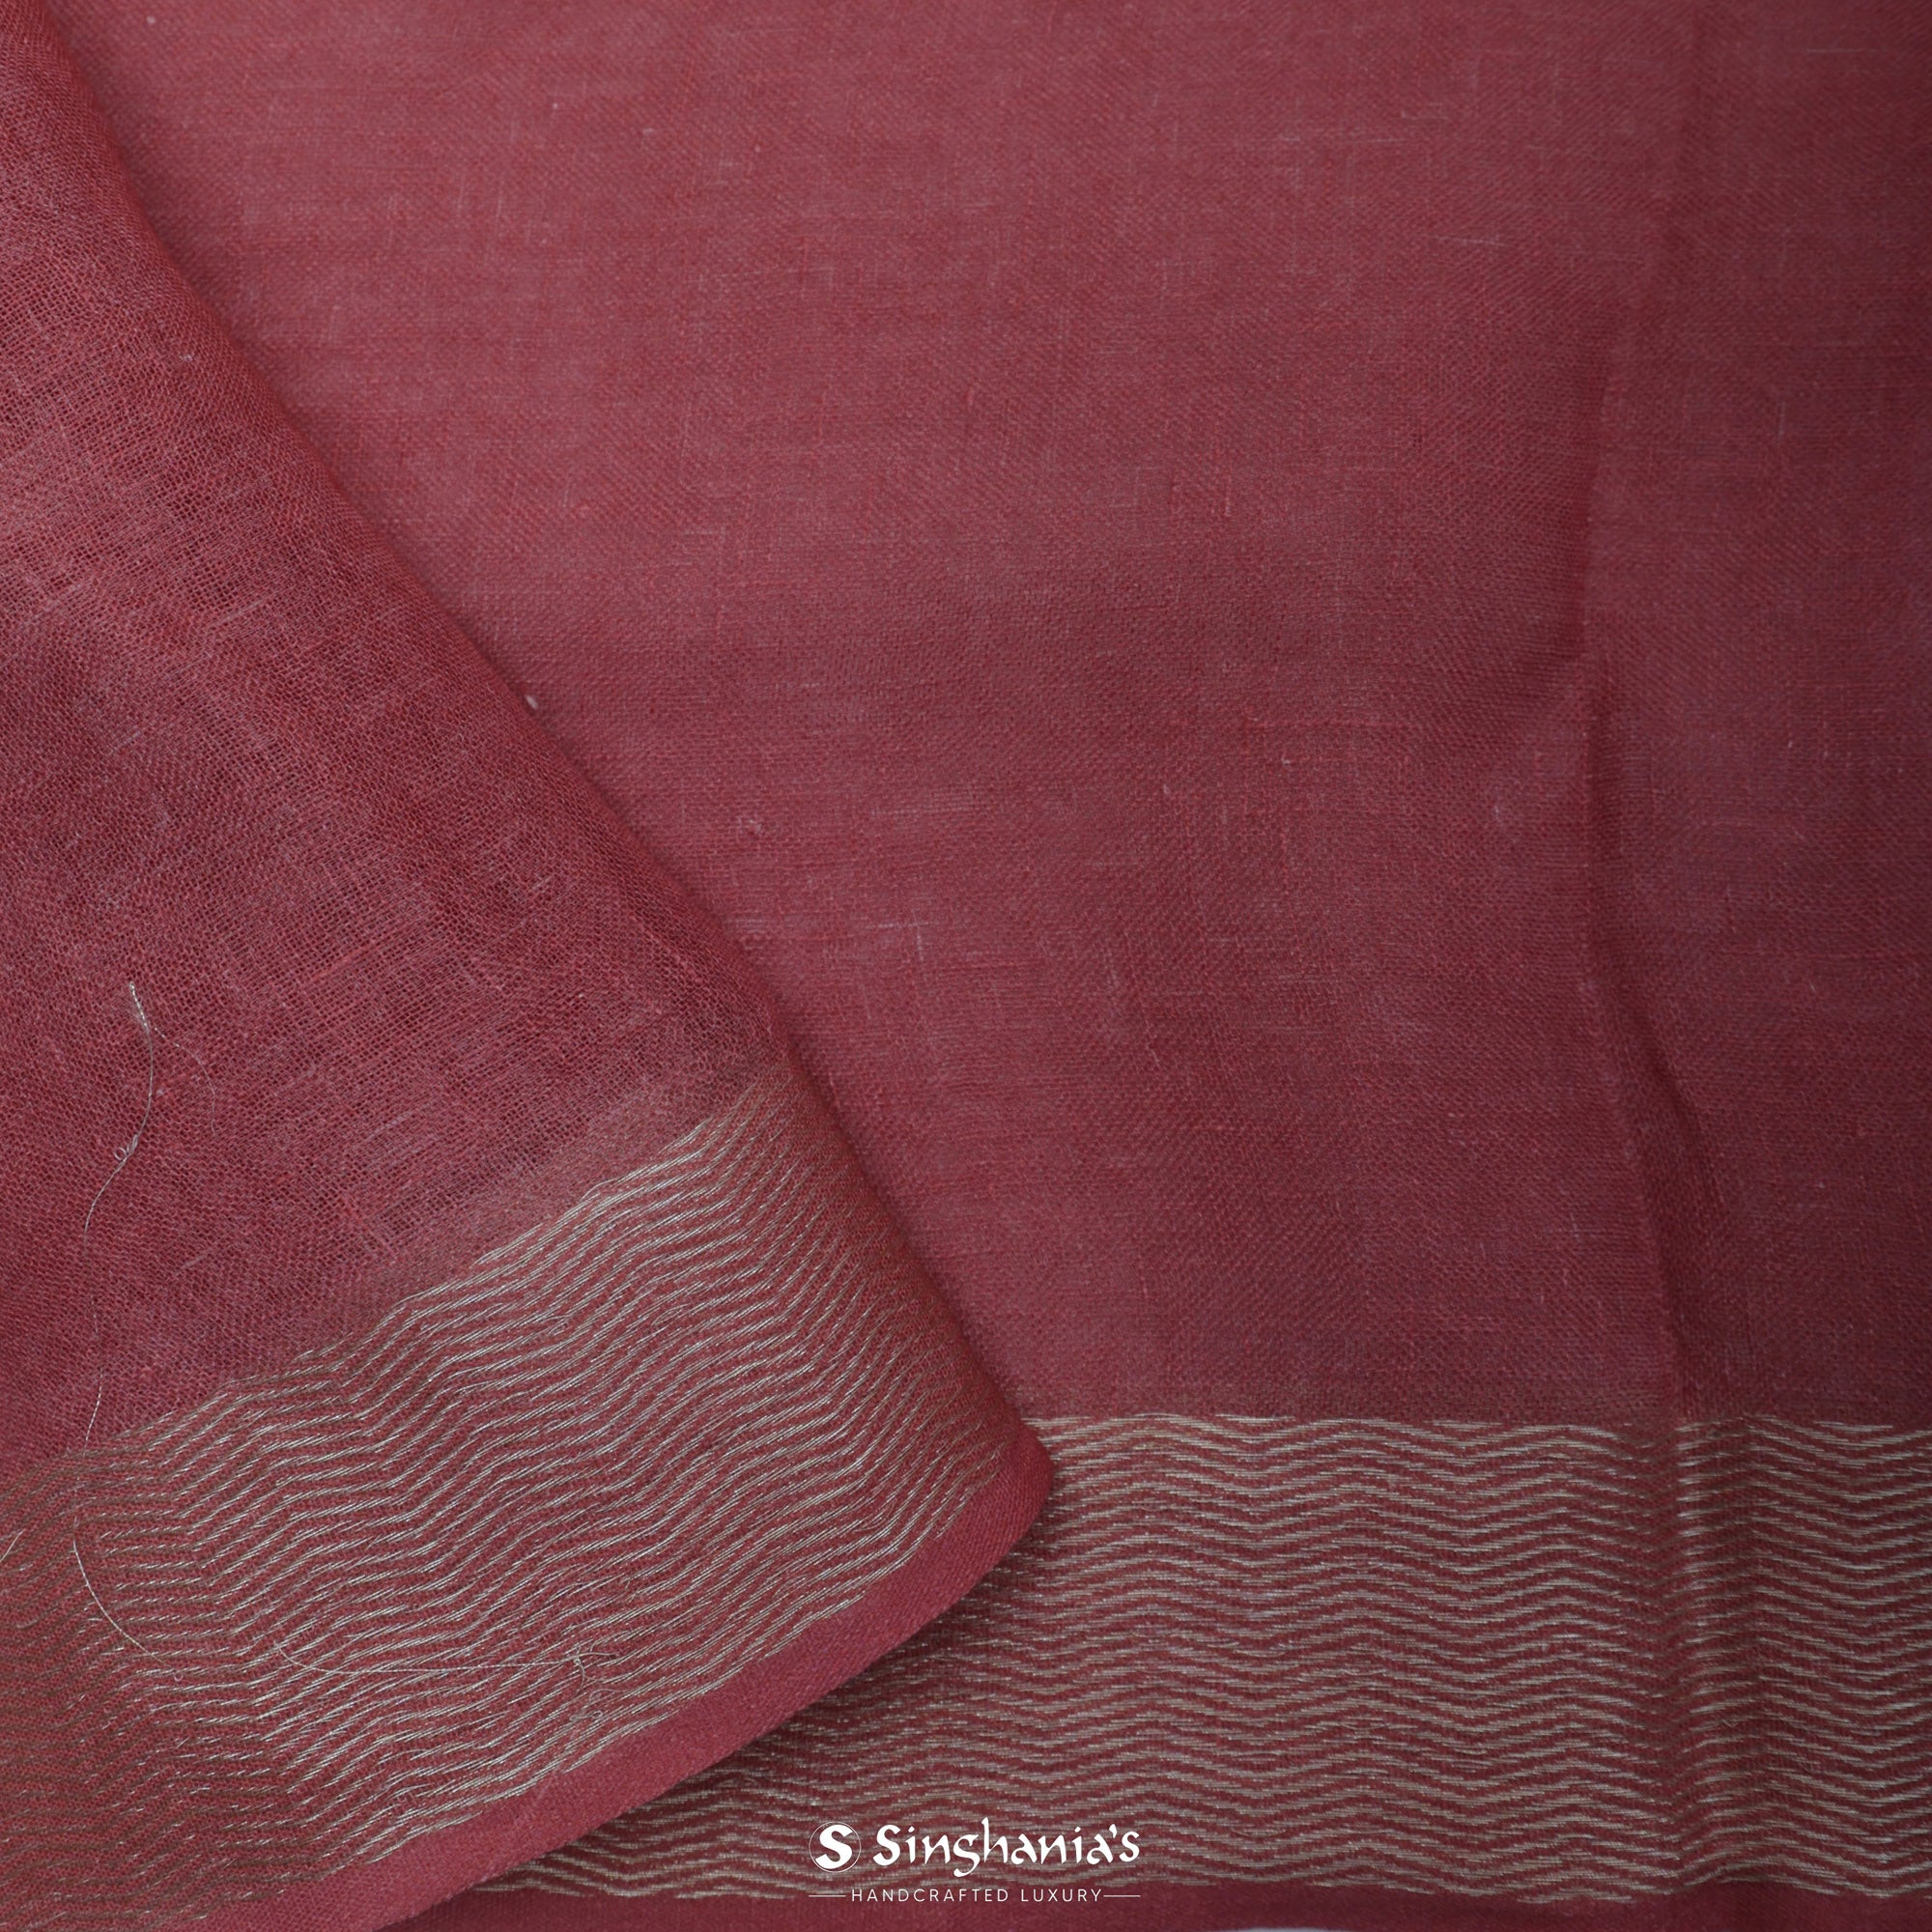 Milano Pink Printed Linen Saree With Floral Jaal Design